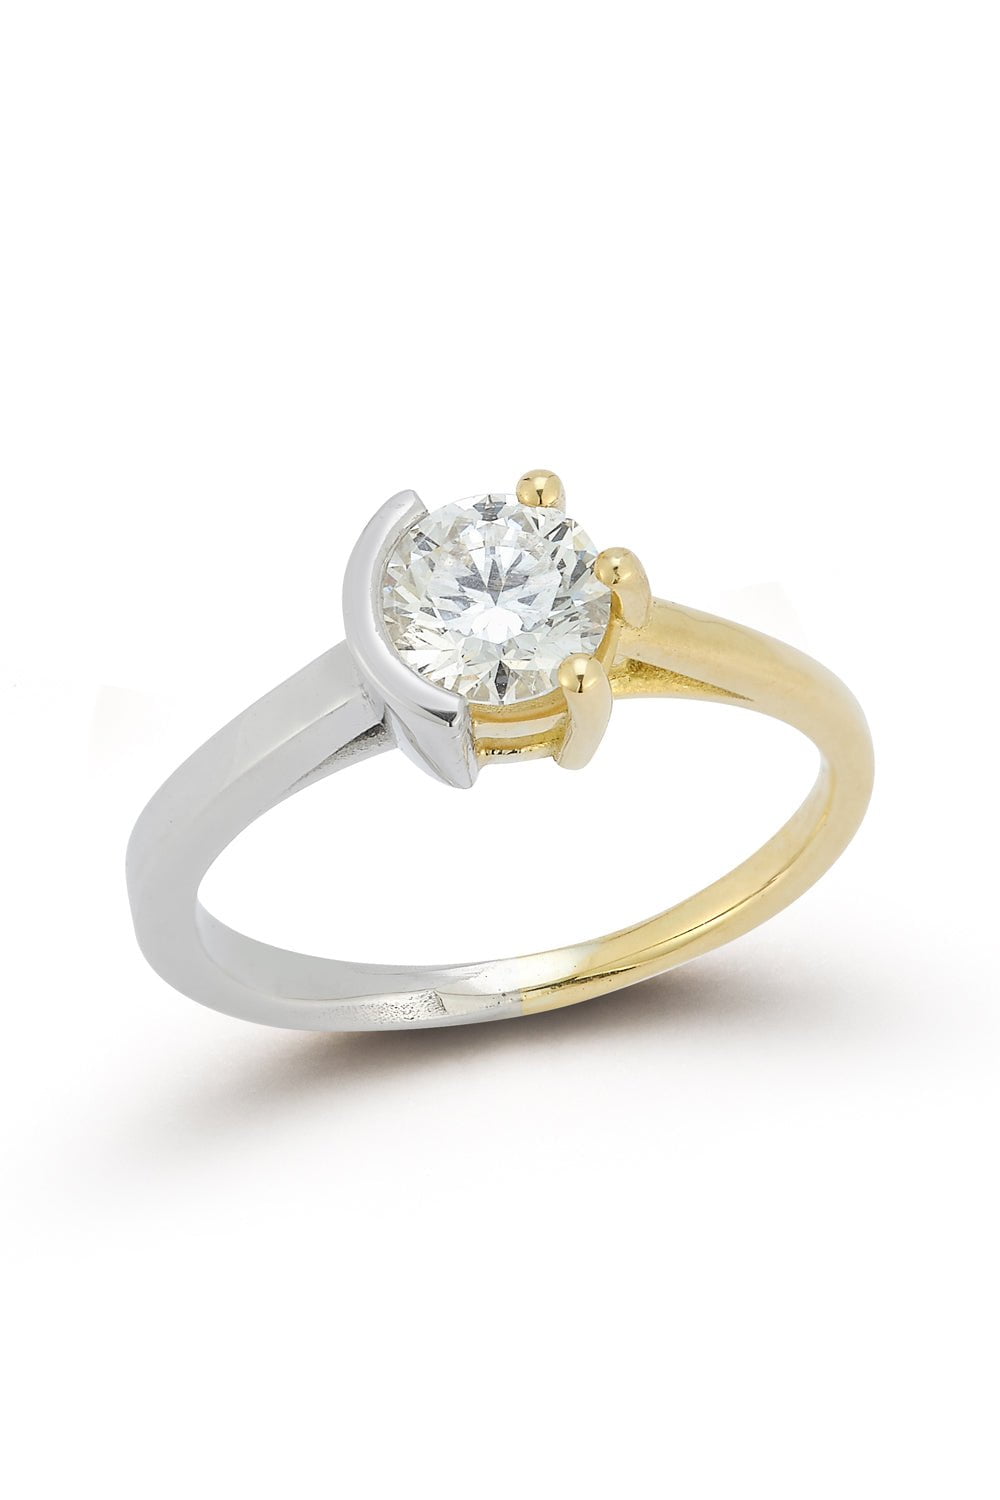 COMMON RITE SUPPLY-Dealer's Choice Ring-YELLOW GOLD & PLATINUM